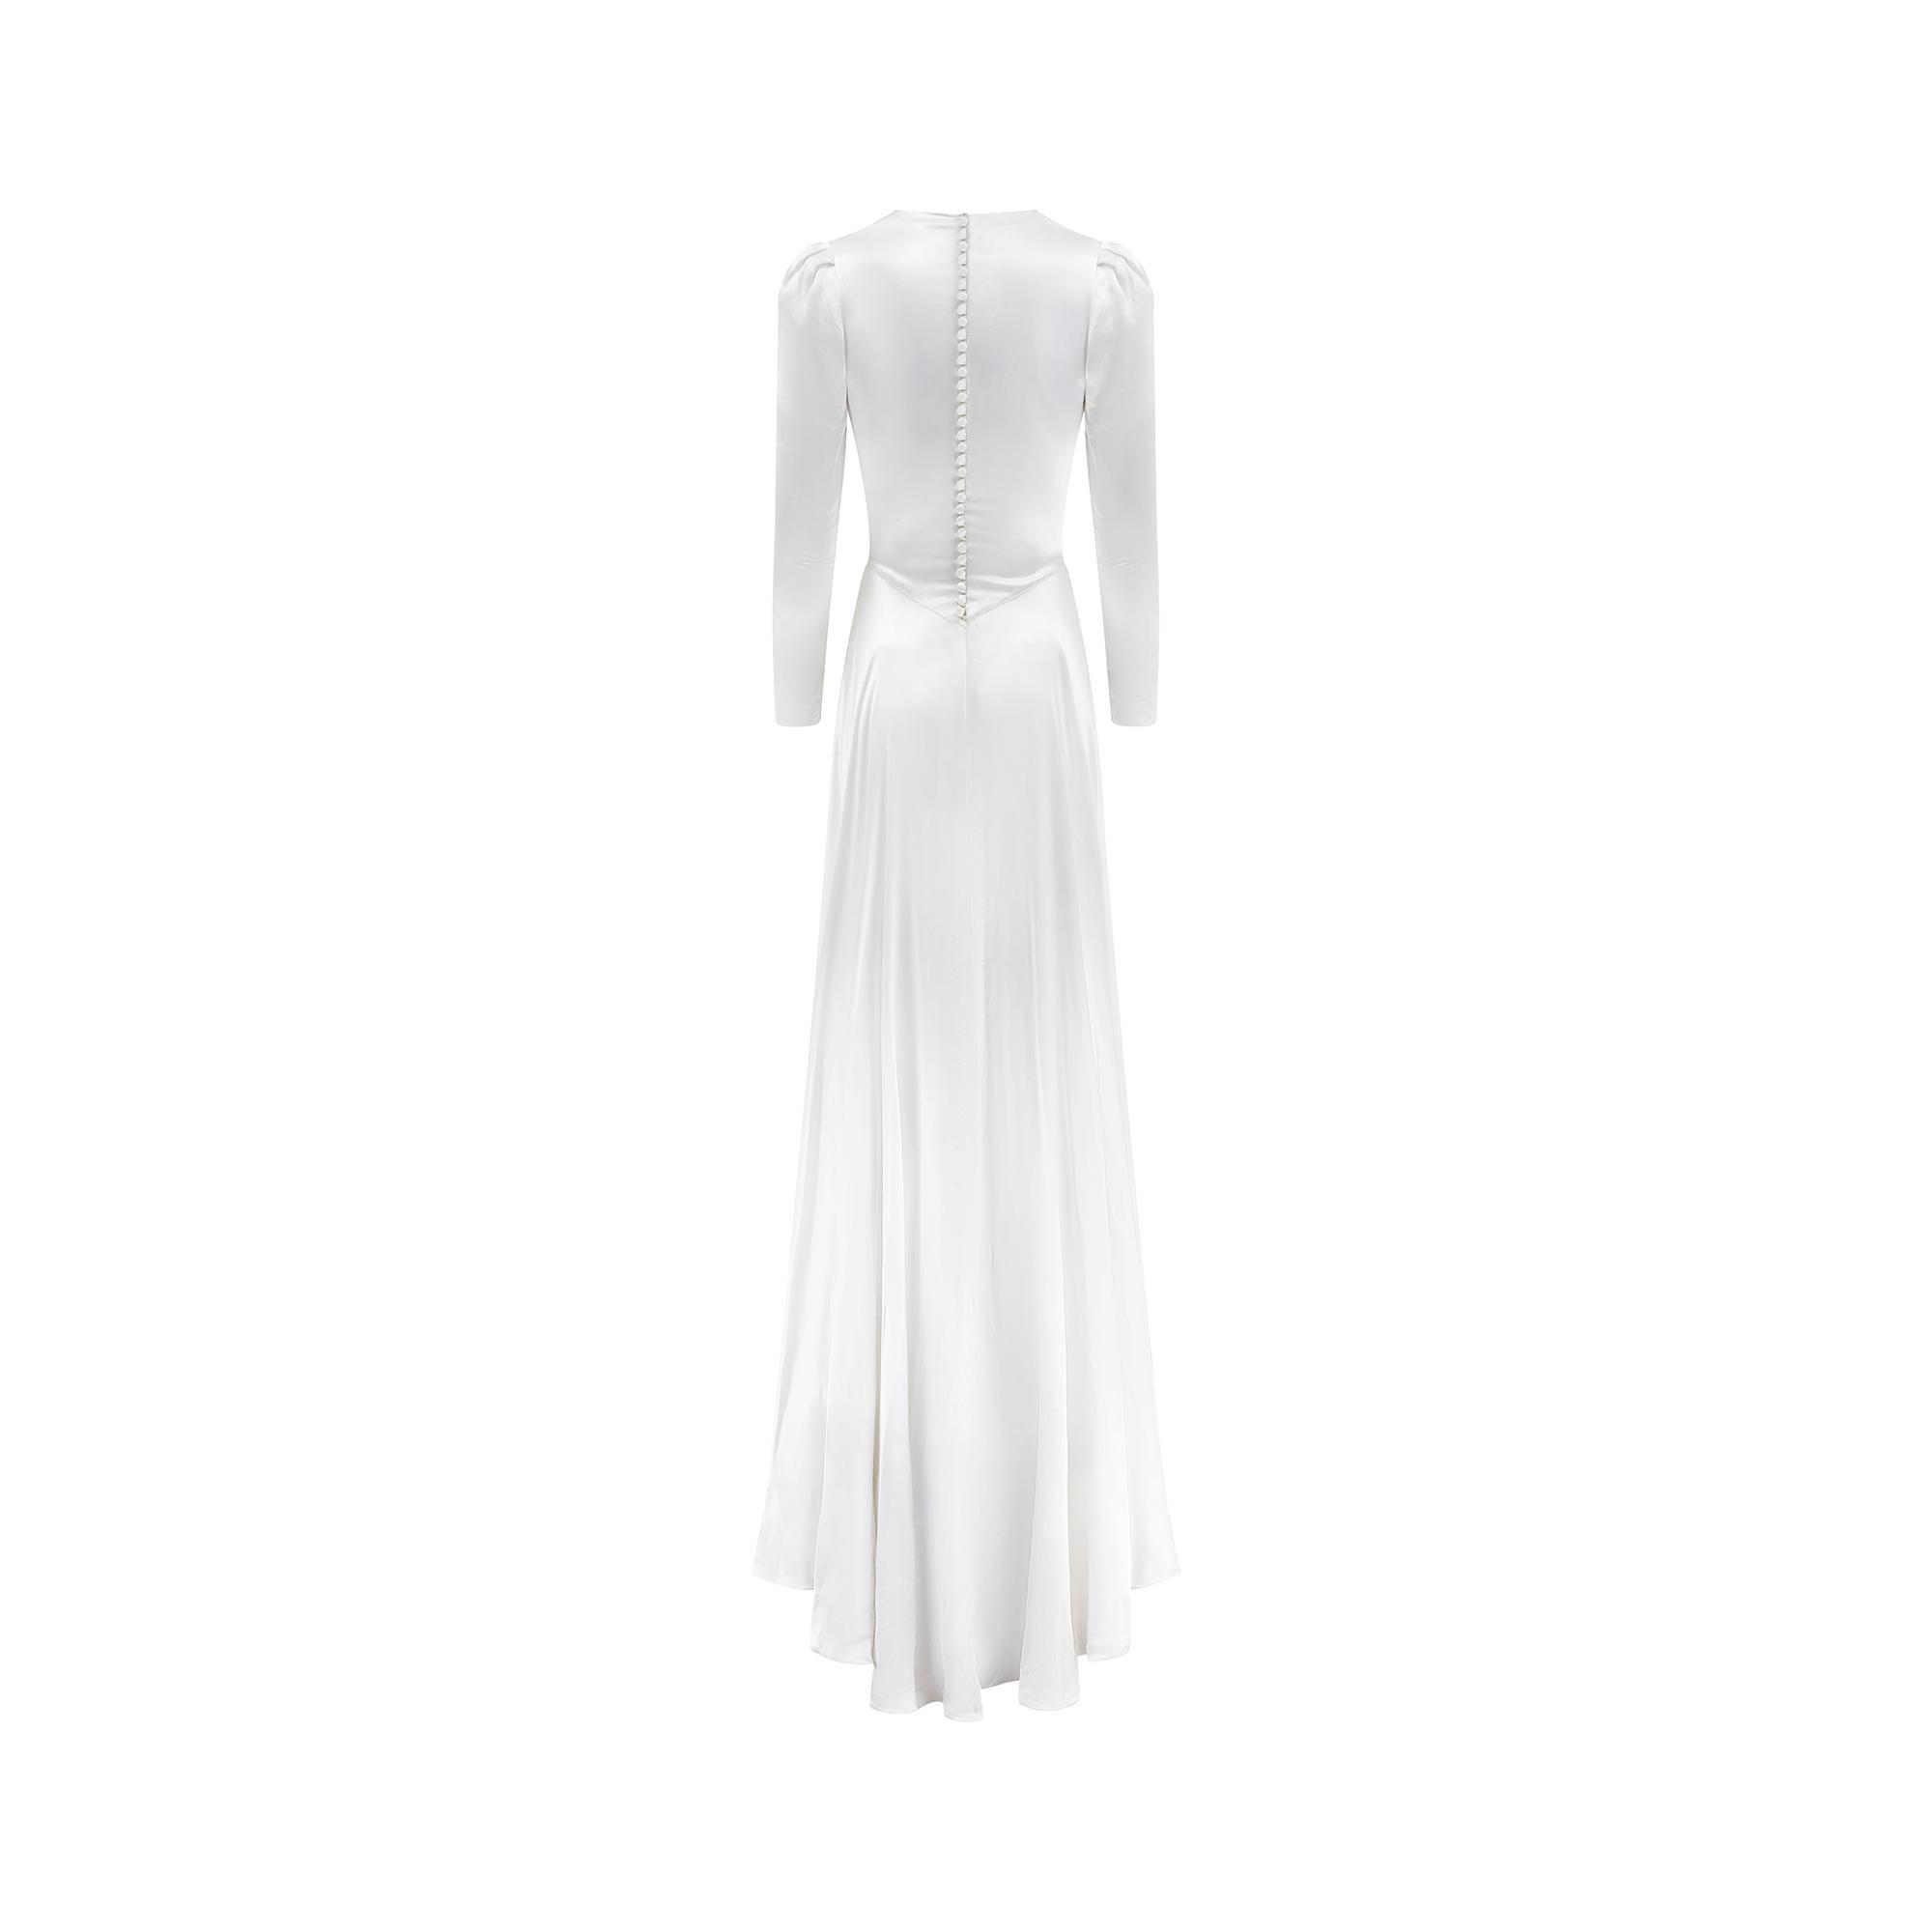 Women's 1940s White Satin Wedding Dress with Train For Sale